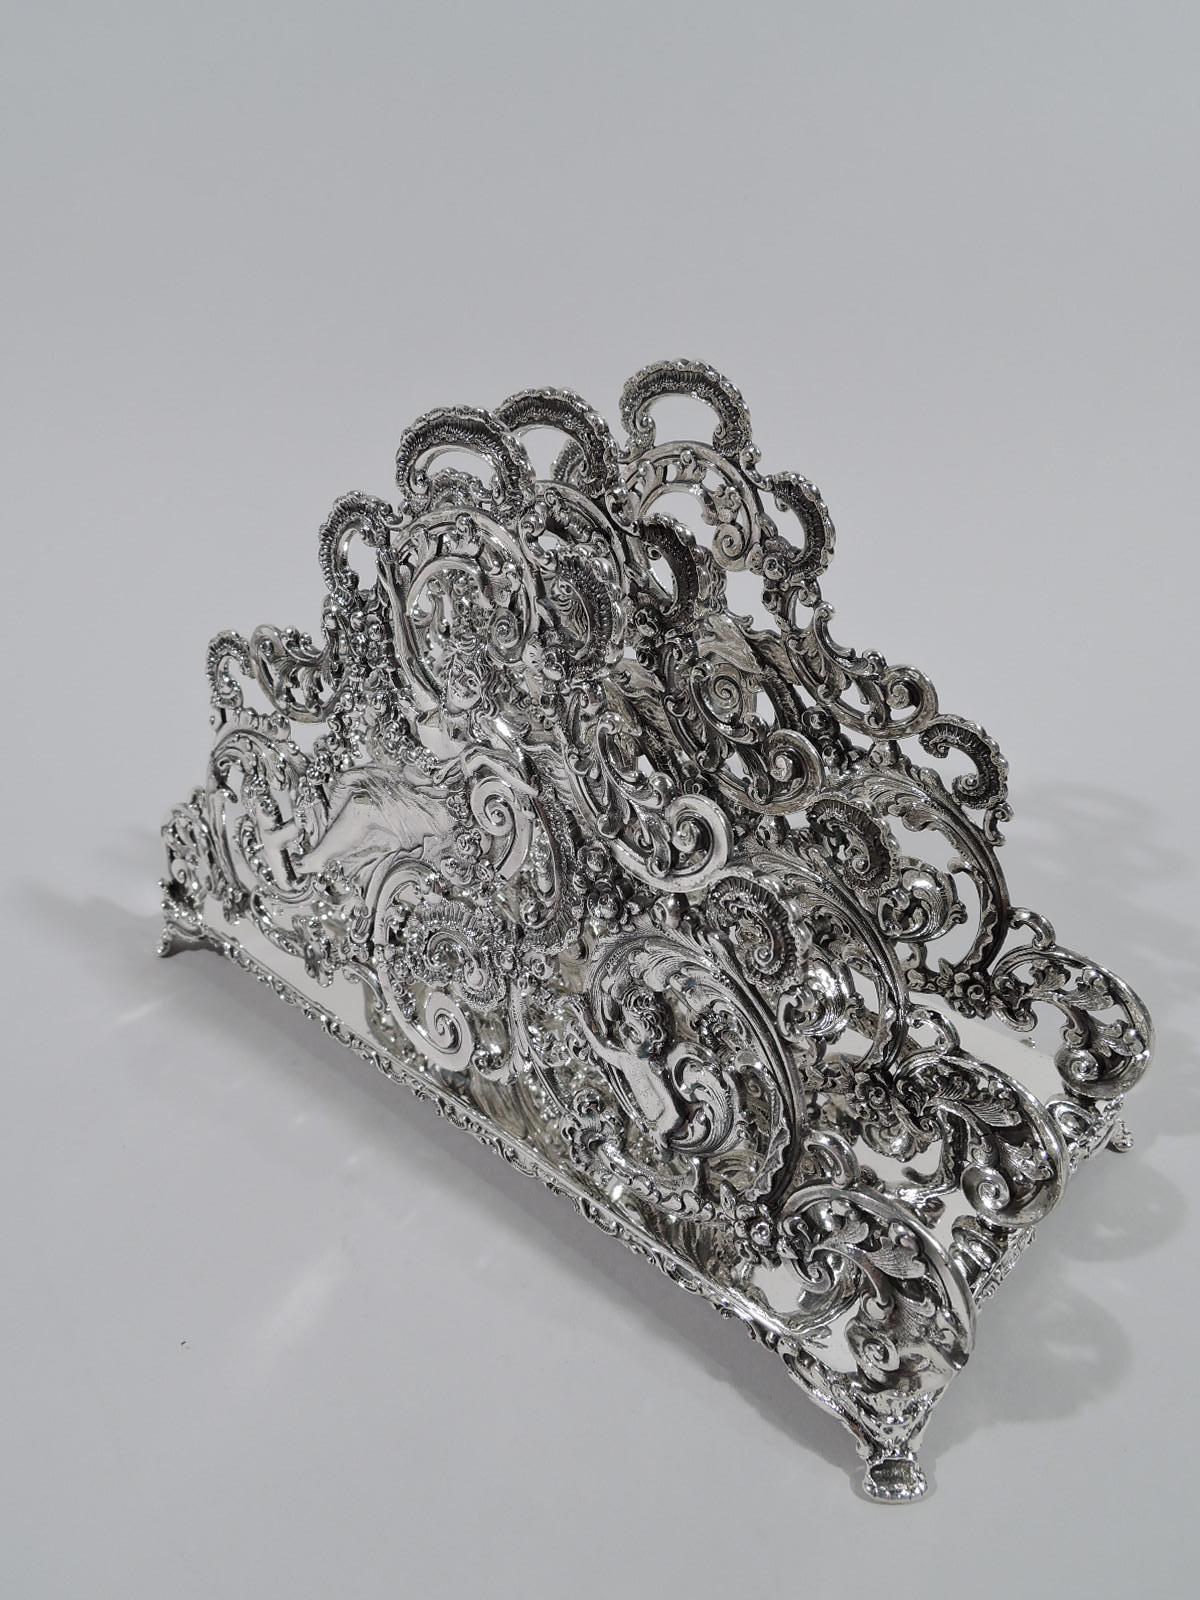 Turn-of-the-century Art Nouveau Rococo sterling silver letter rack. Plain rectangular base with scrolled rim and foliate corner supports. Three identical partitions: buxom lolling lady and two cherubs holding garland at ends, surrounded by open